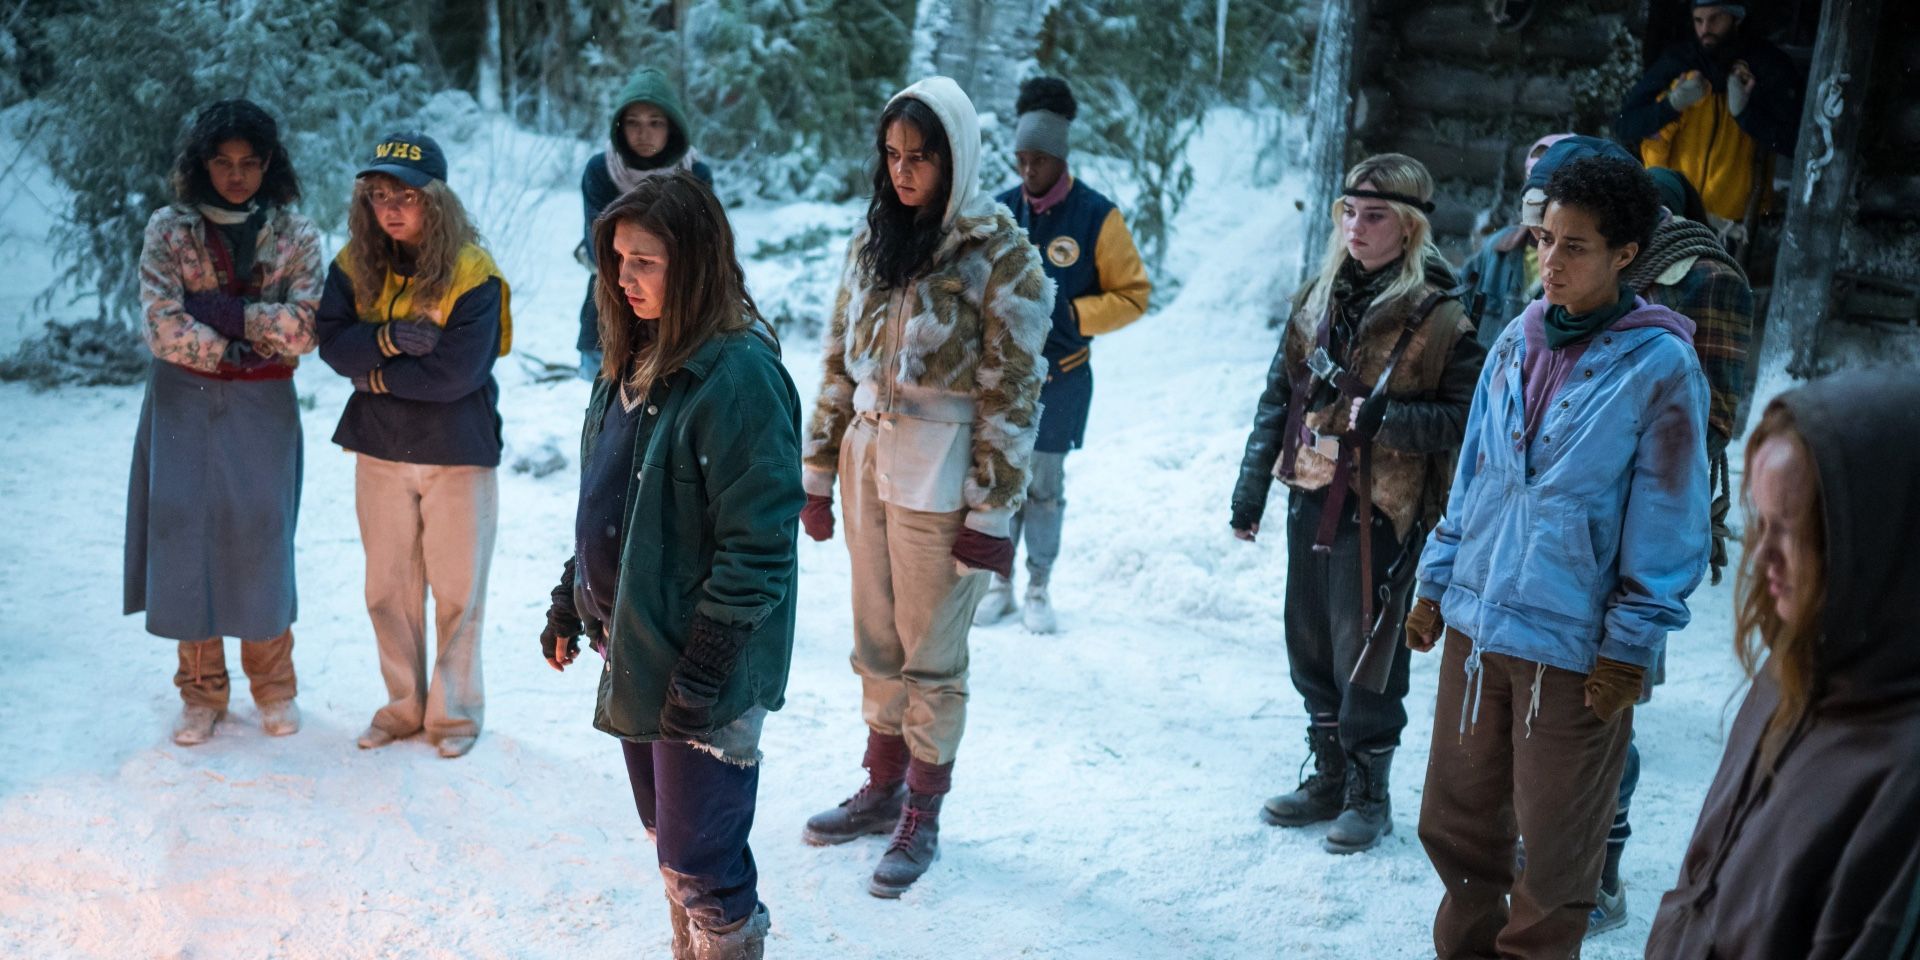 The soccer team stands outside the snowy cabin in Yellowjackets season 2